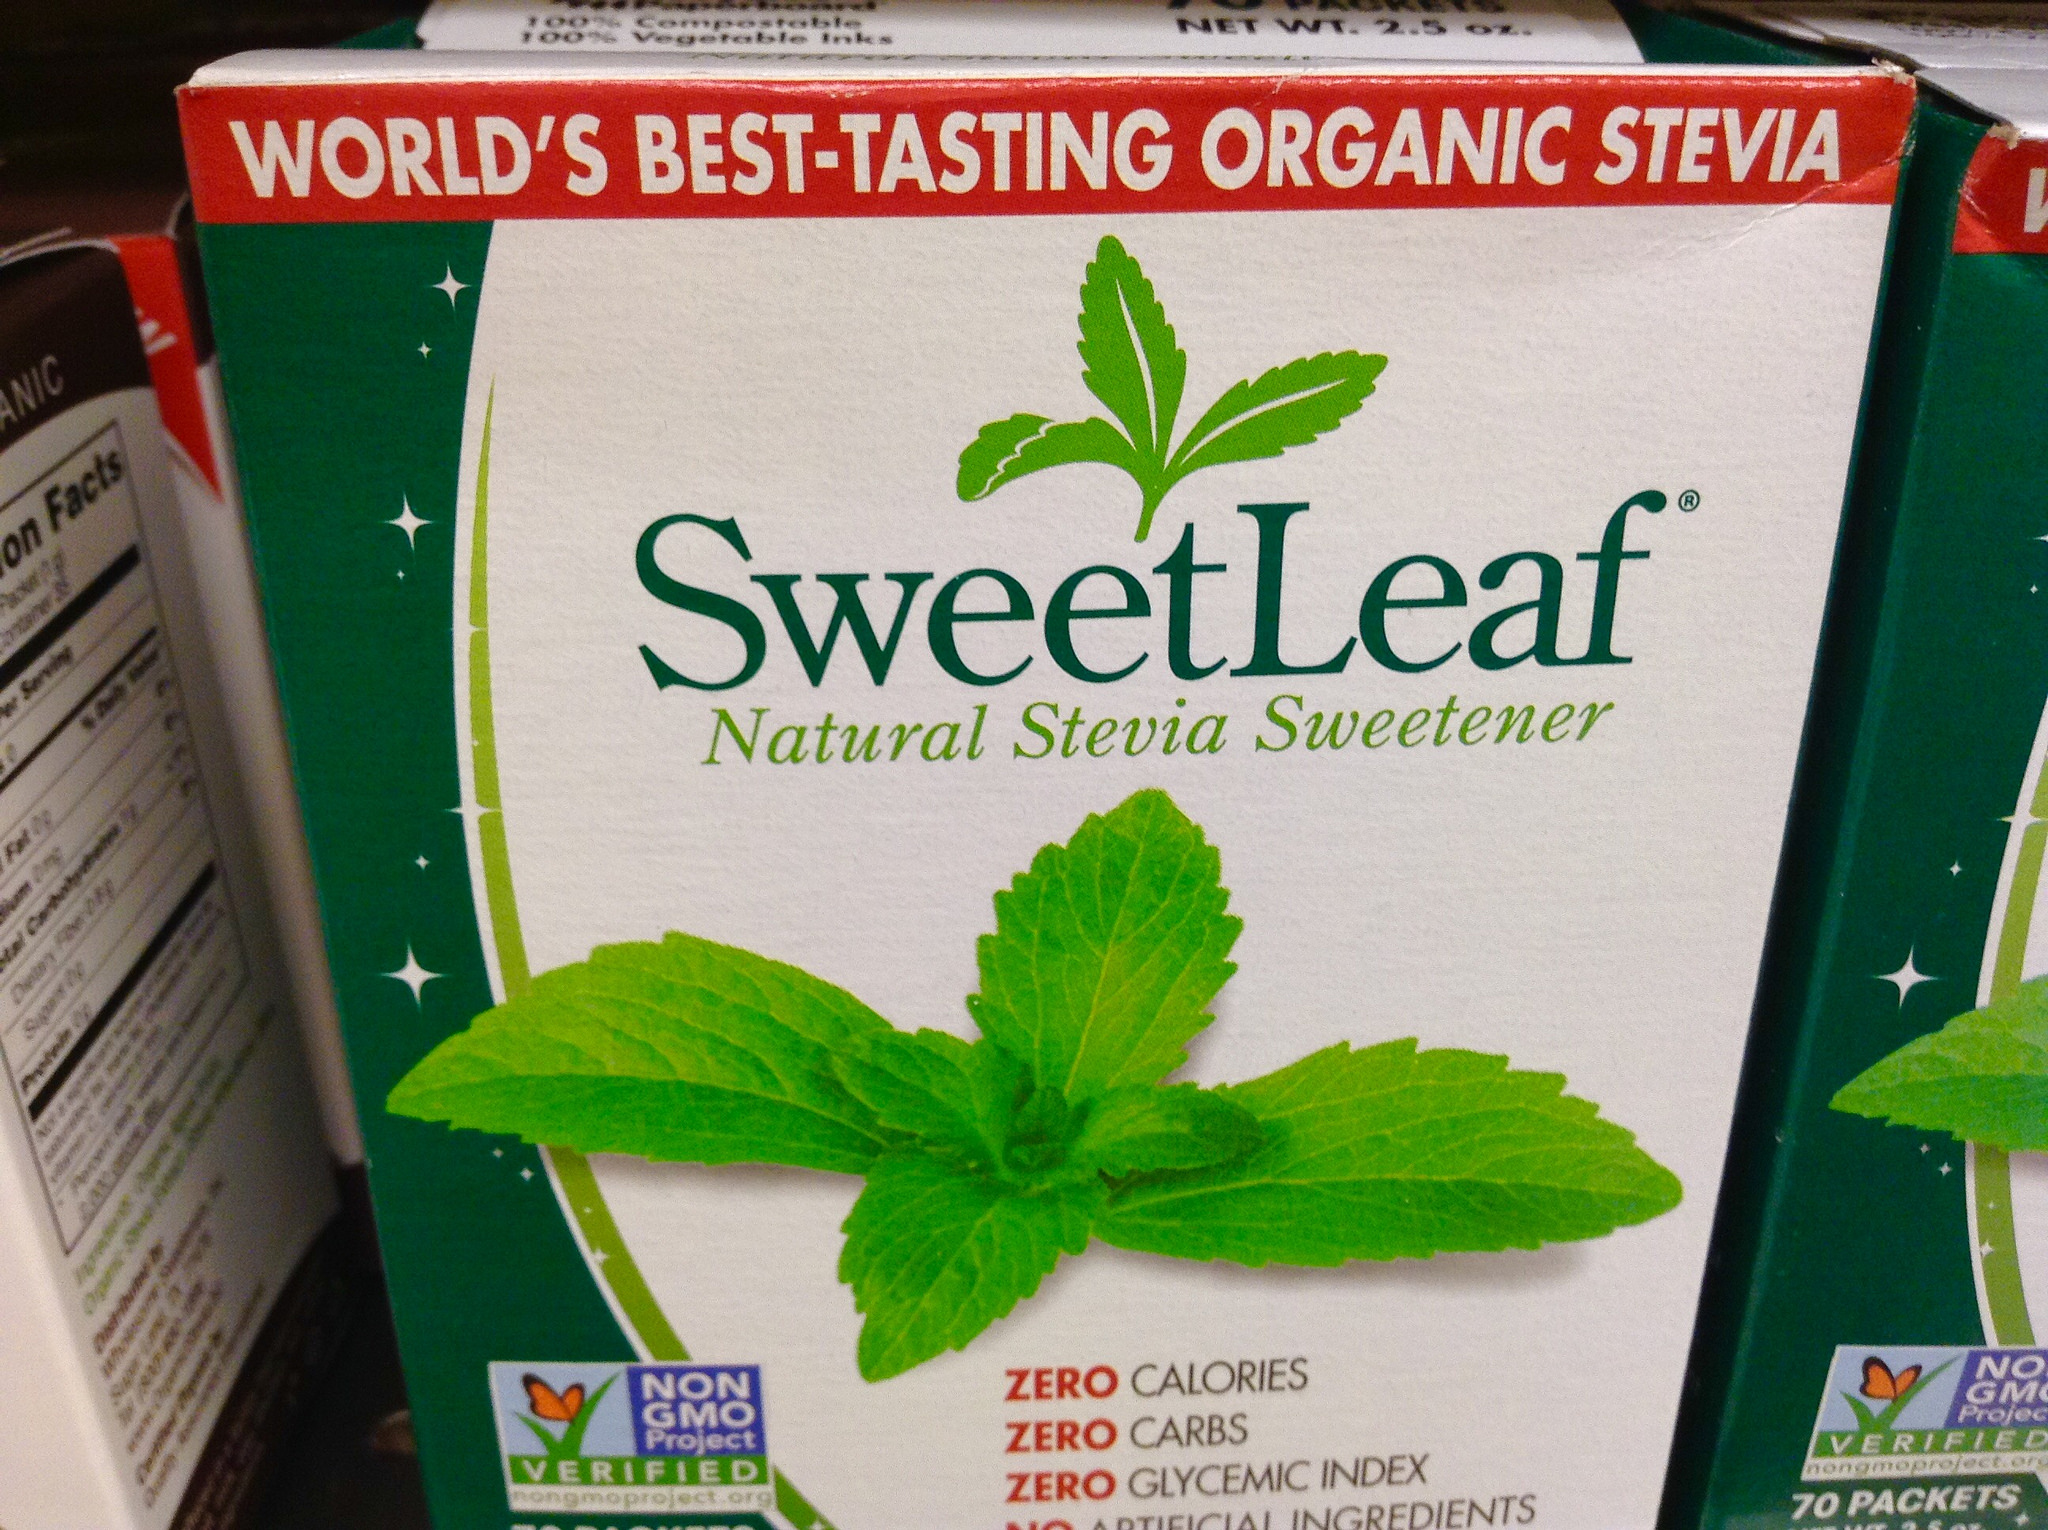 Photo shows a box of SweetLeaf stevia sweetener, with front-of-package labels "world's best-tasting organic stevia," "Natural Stevia Sweetener," "ZERO calories, ZERO carbs, ZERO glycemic index," as well as a Non-GMO Project l